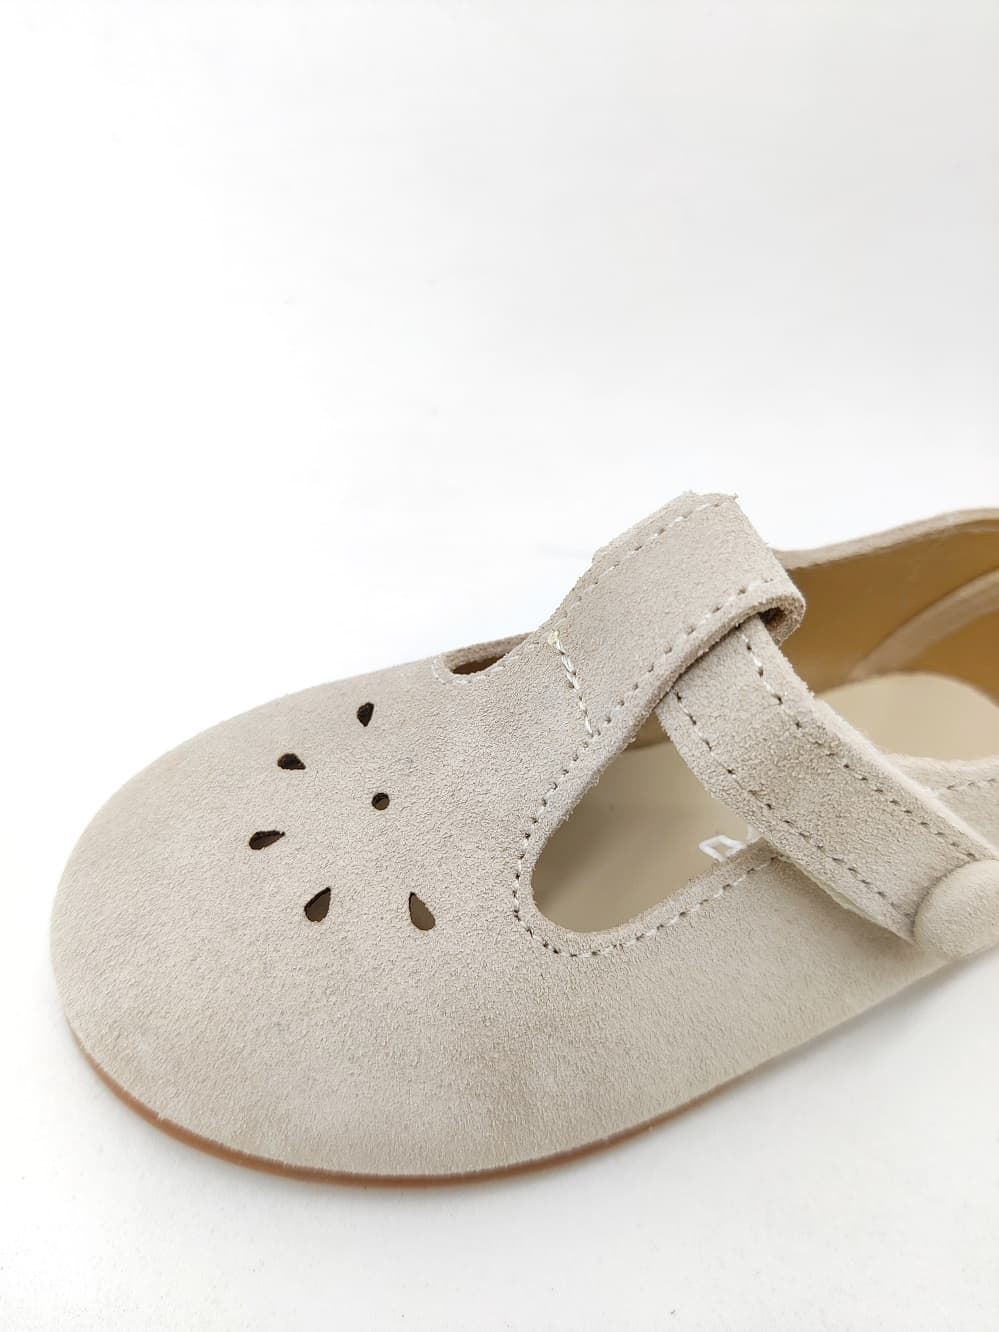 Unisex children's Pepito sweets in raw suede - Image 3